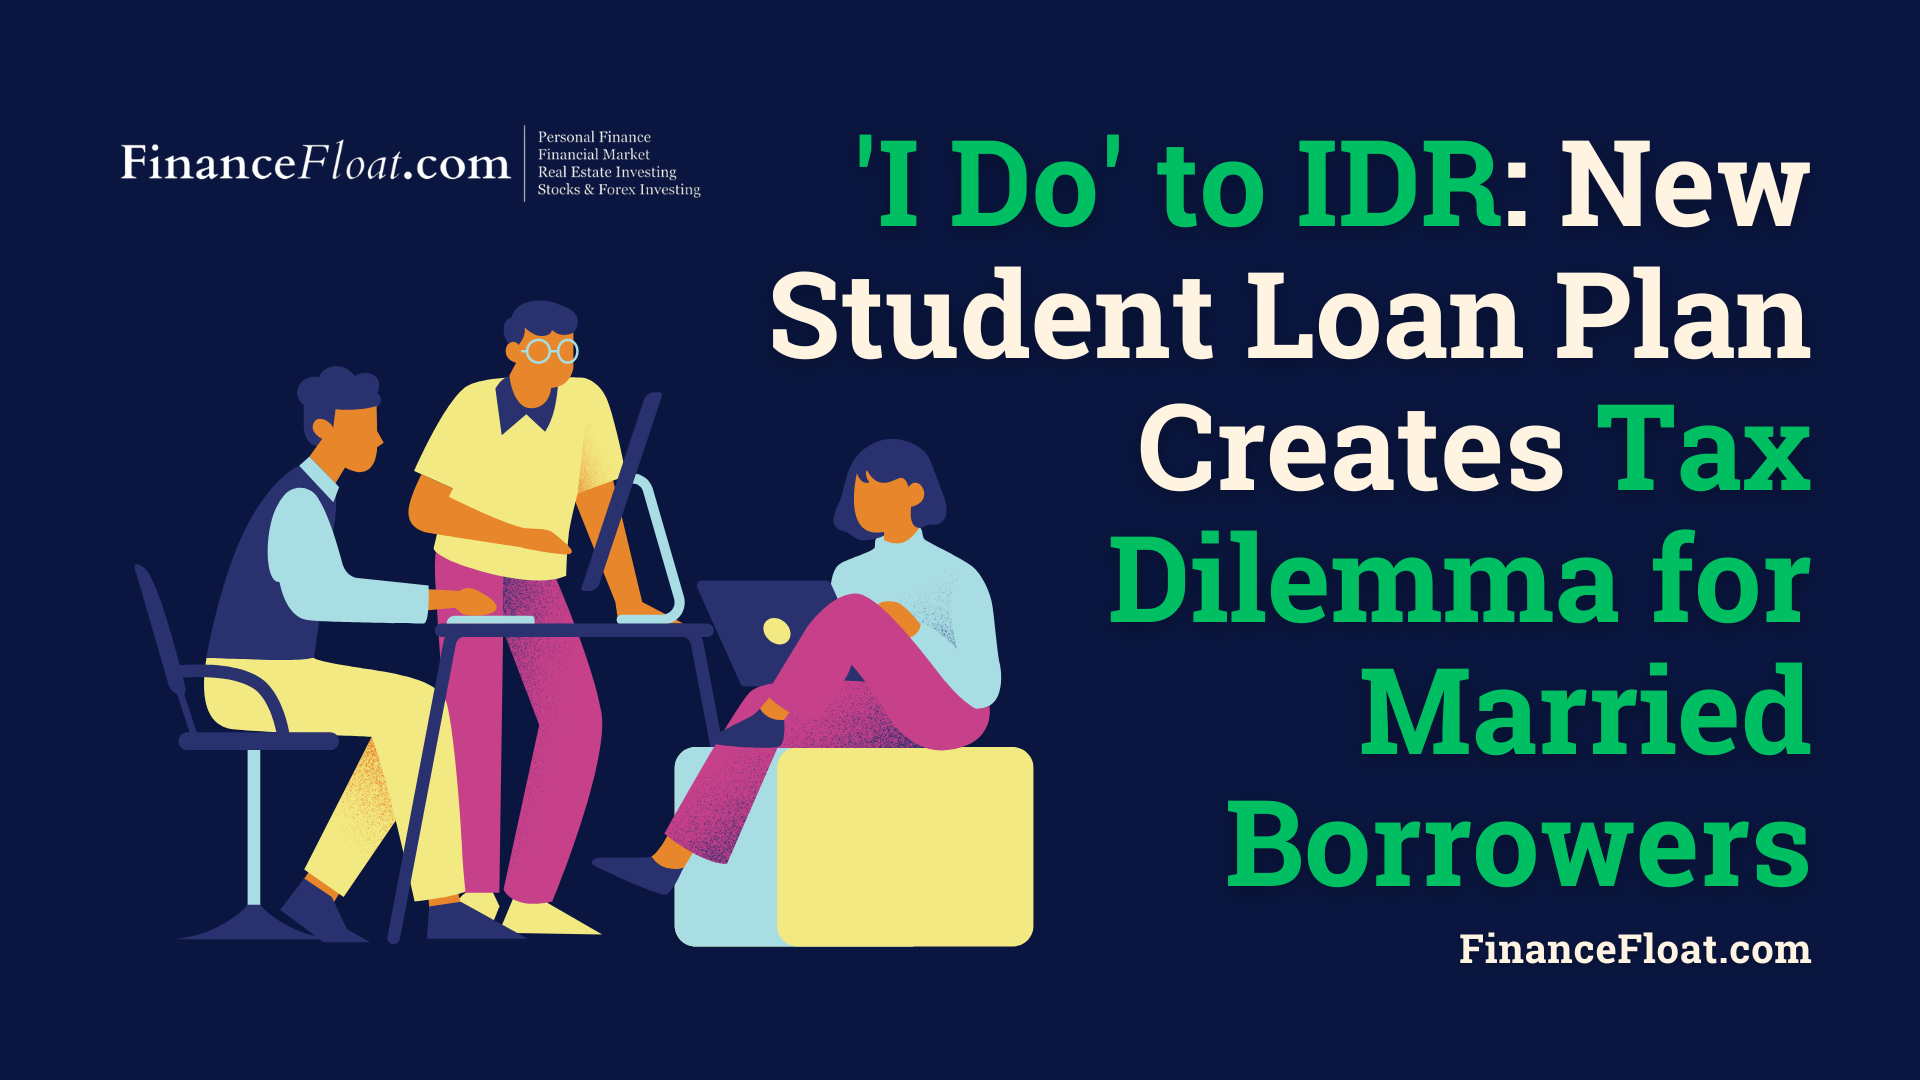 I Do to IDR New Student Loan Plan Creates Tax Dilemma for Married Borrowers